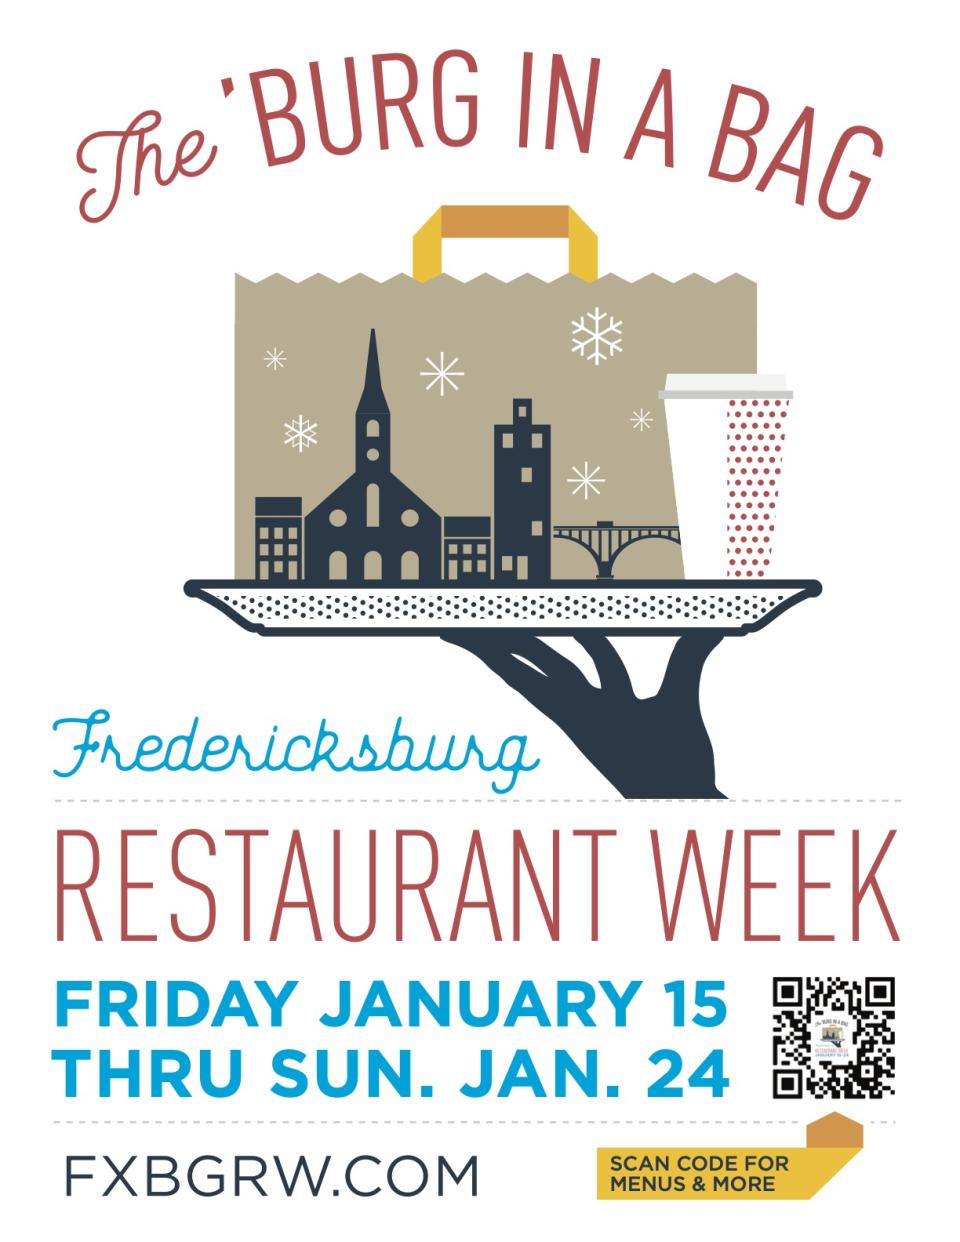 The City of Fredericksburg will hold its annual Winter Restaurant Week beginning Friday (image courtesy of Fredericksburg Tourism Office).